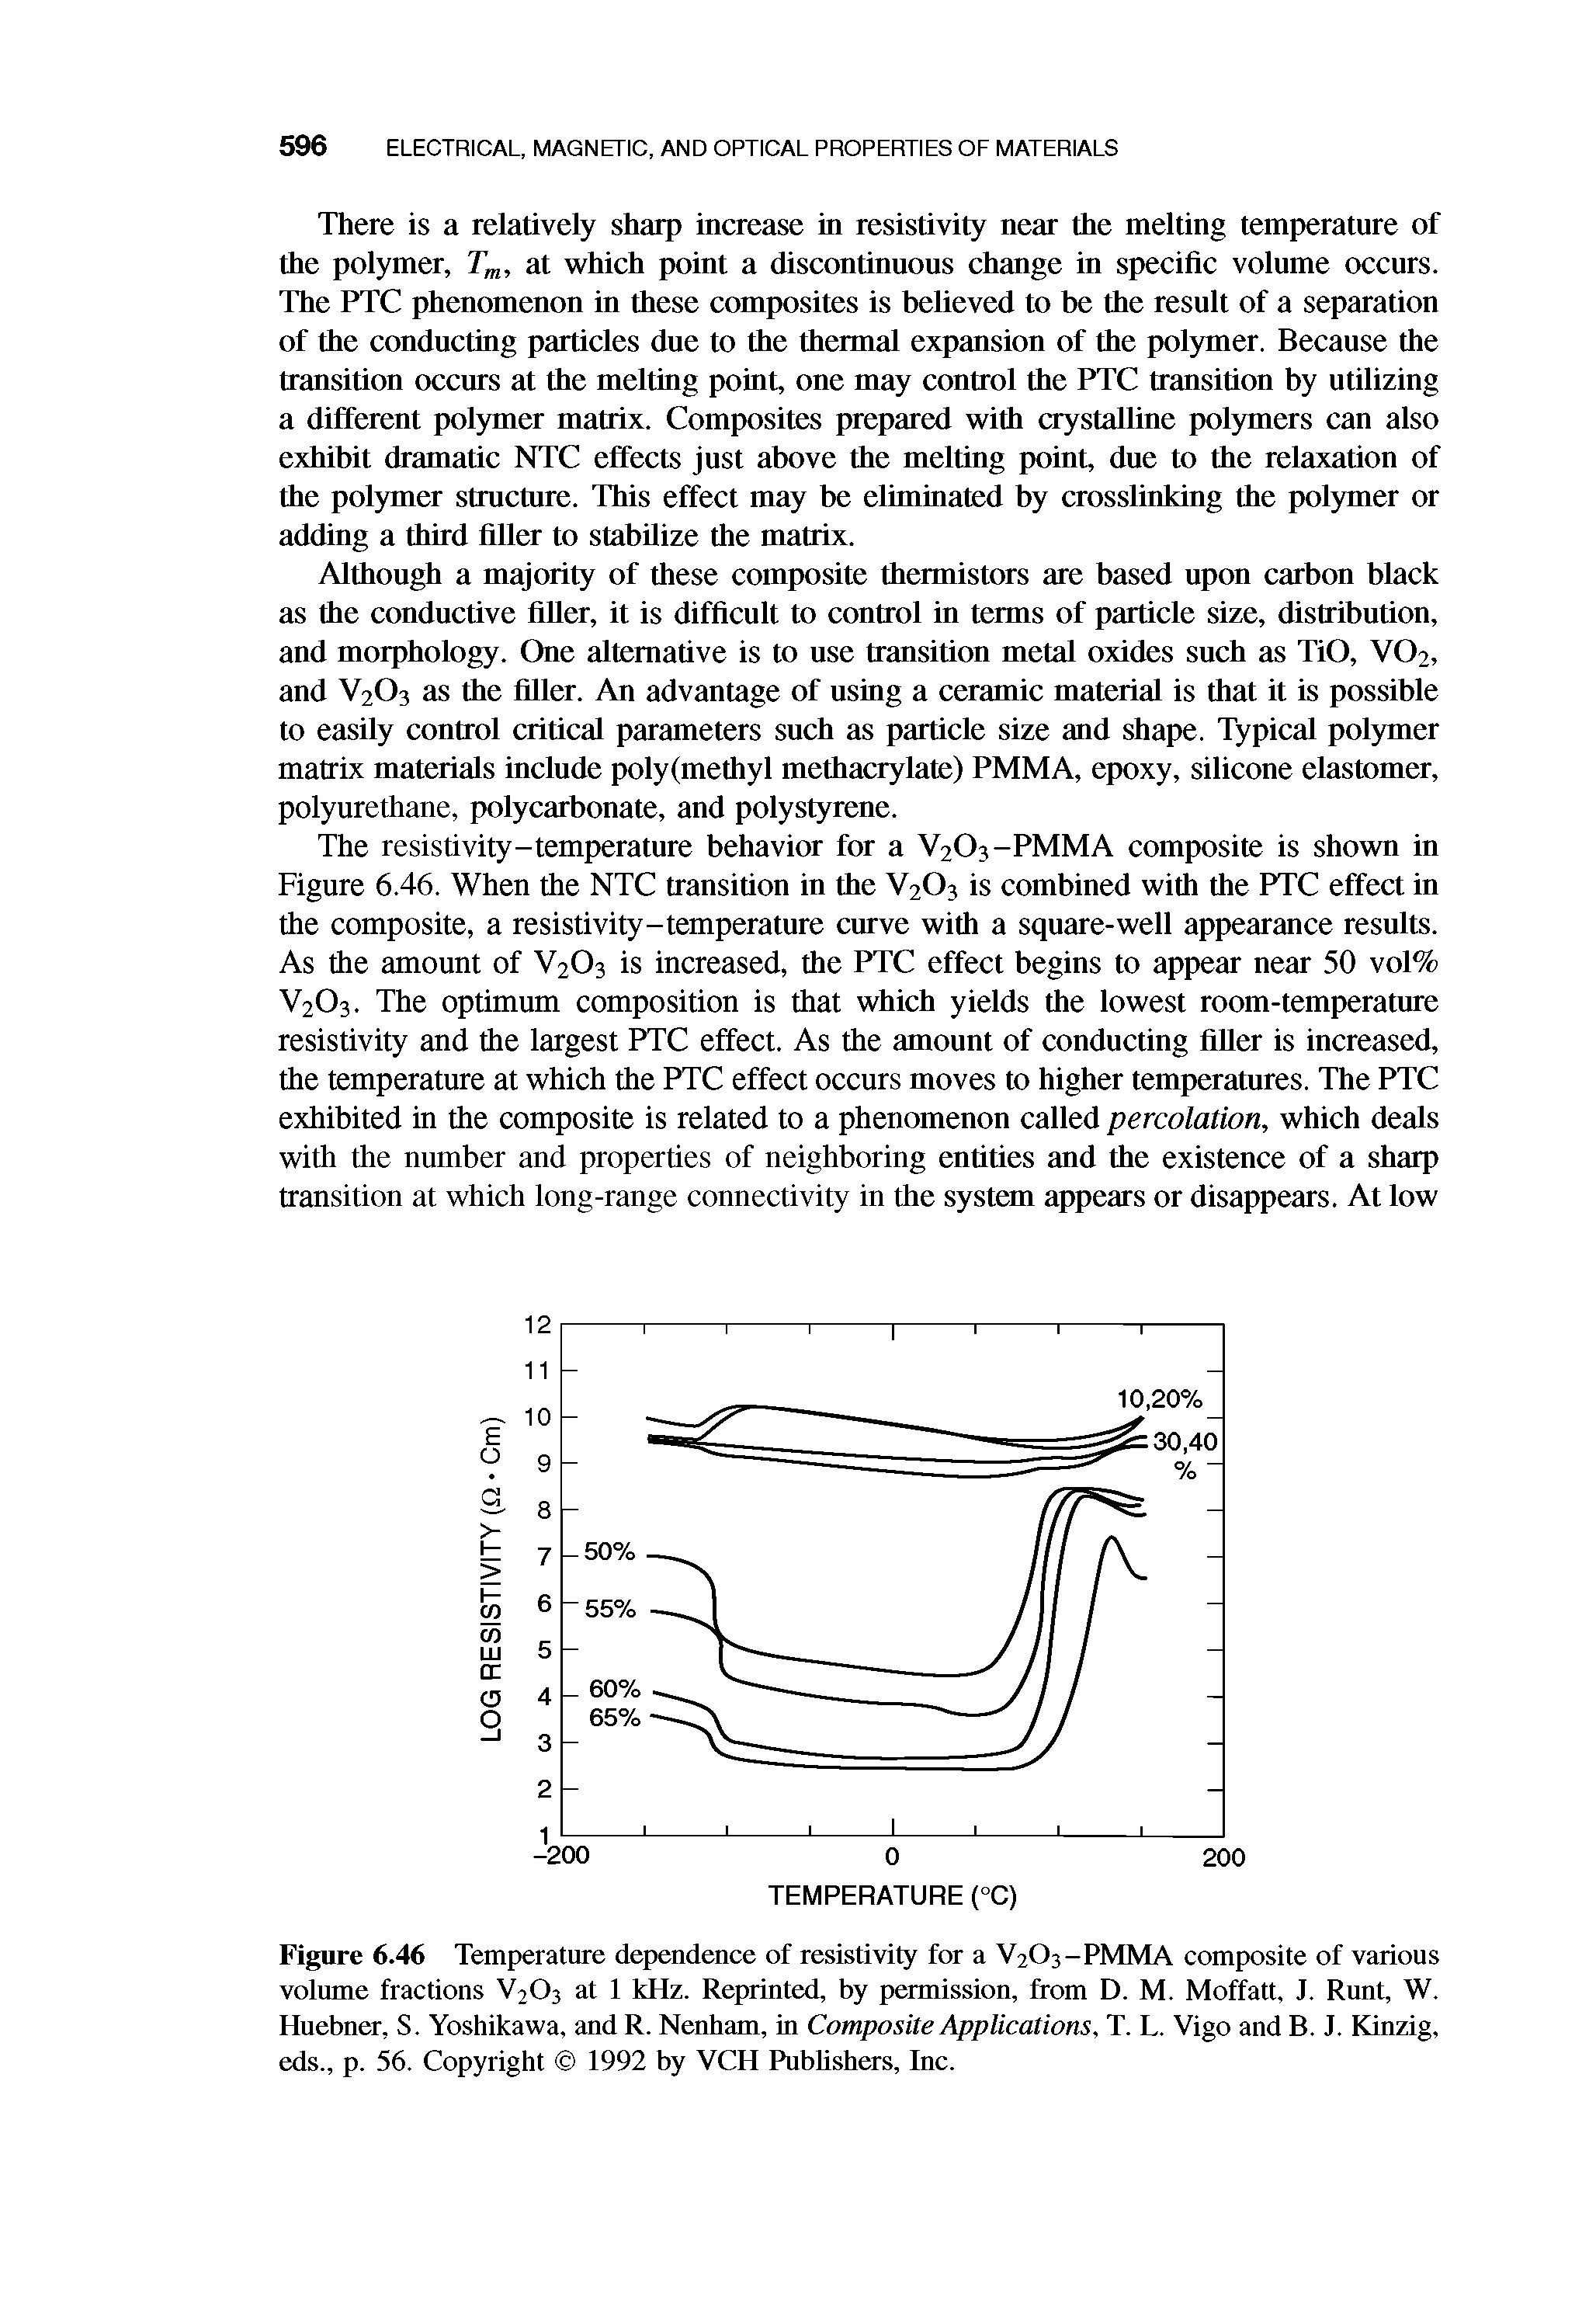 Figure 6.46 Temperature dependence of resistivity for a V2O3-PMMA composite of various volume fractions V2O3 at 1 kHz. Reprinted, by permission, from D. M. Moffatt, J. Runt, W. Huebner, S. Yoshikawa, and R. Nenham, in Composite Applications, T. L. Vigo and B. J. Kinzig, eds., p. 56. Copyright 1992 by VCH Publishers, Inc.